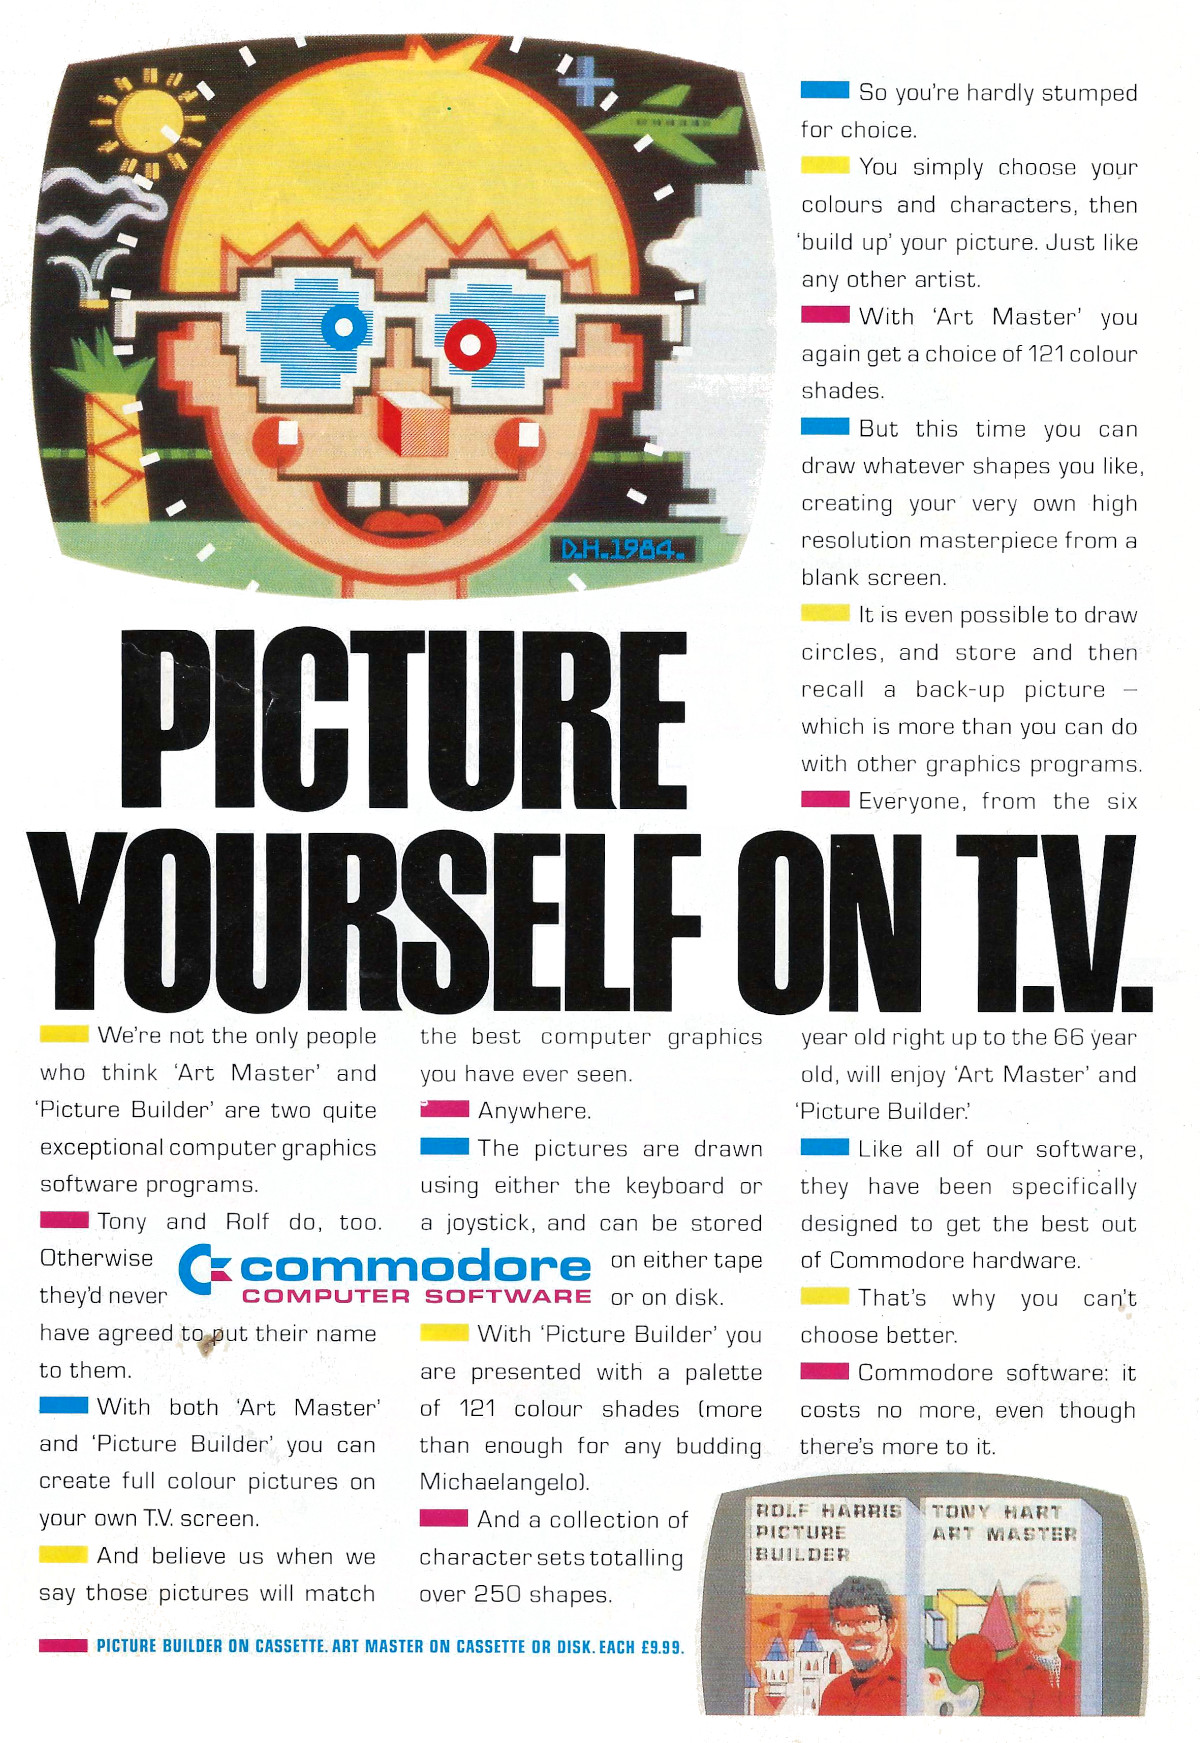 A <span class='hilite'><span class='hilite'>Commodore</span></span> Computer Software advert showing Rolf Harris's Picture Builder and Tony Hart's Art Master. From <span class='hilite'><span class='hilite'>Commodore</span></span> Computing International, November 1984